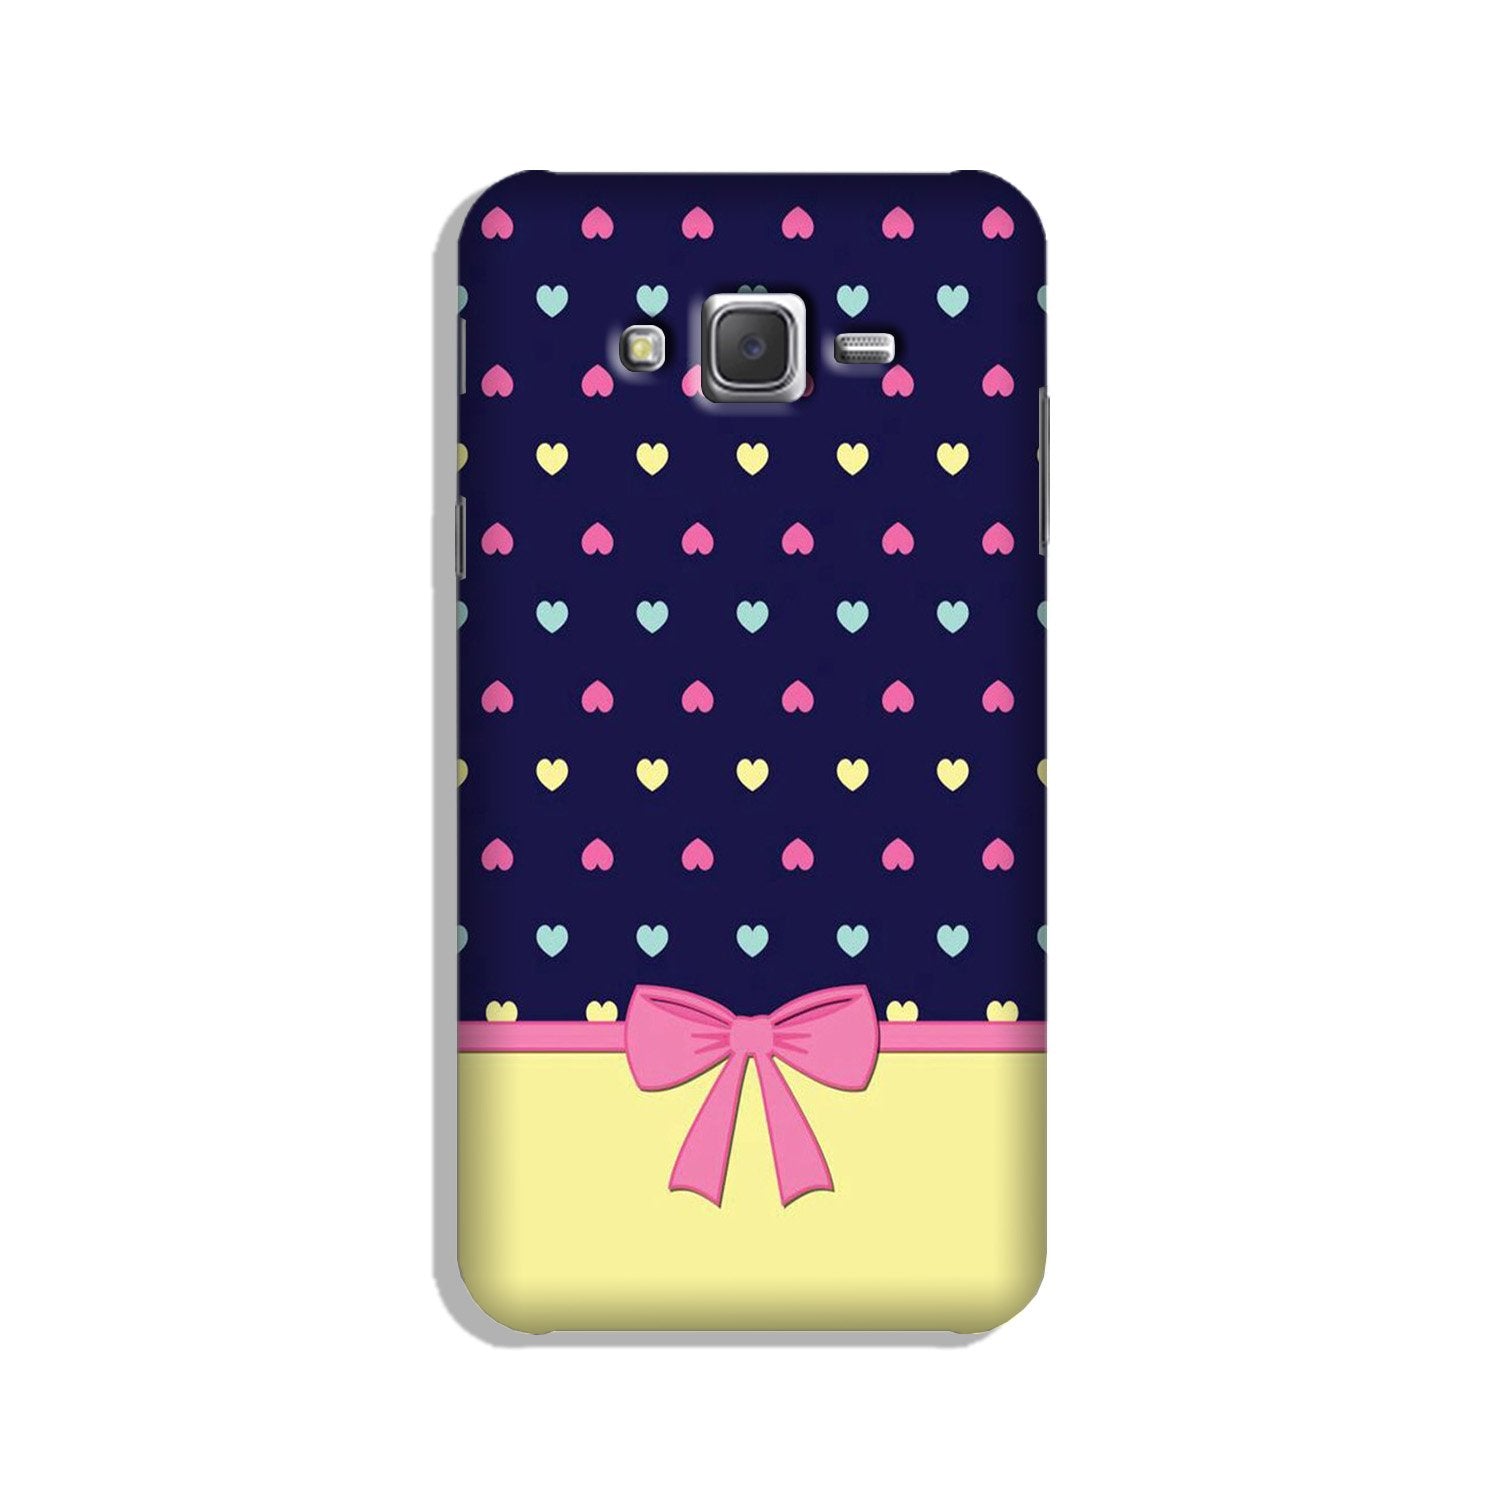 Gift Wrap5 Case for Galaxy J2 (2015)